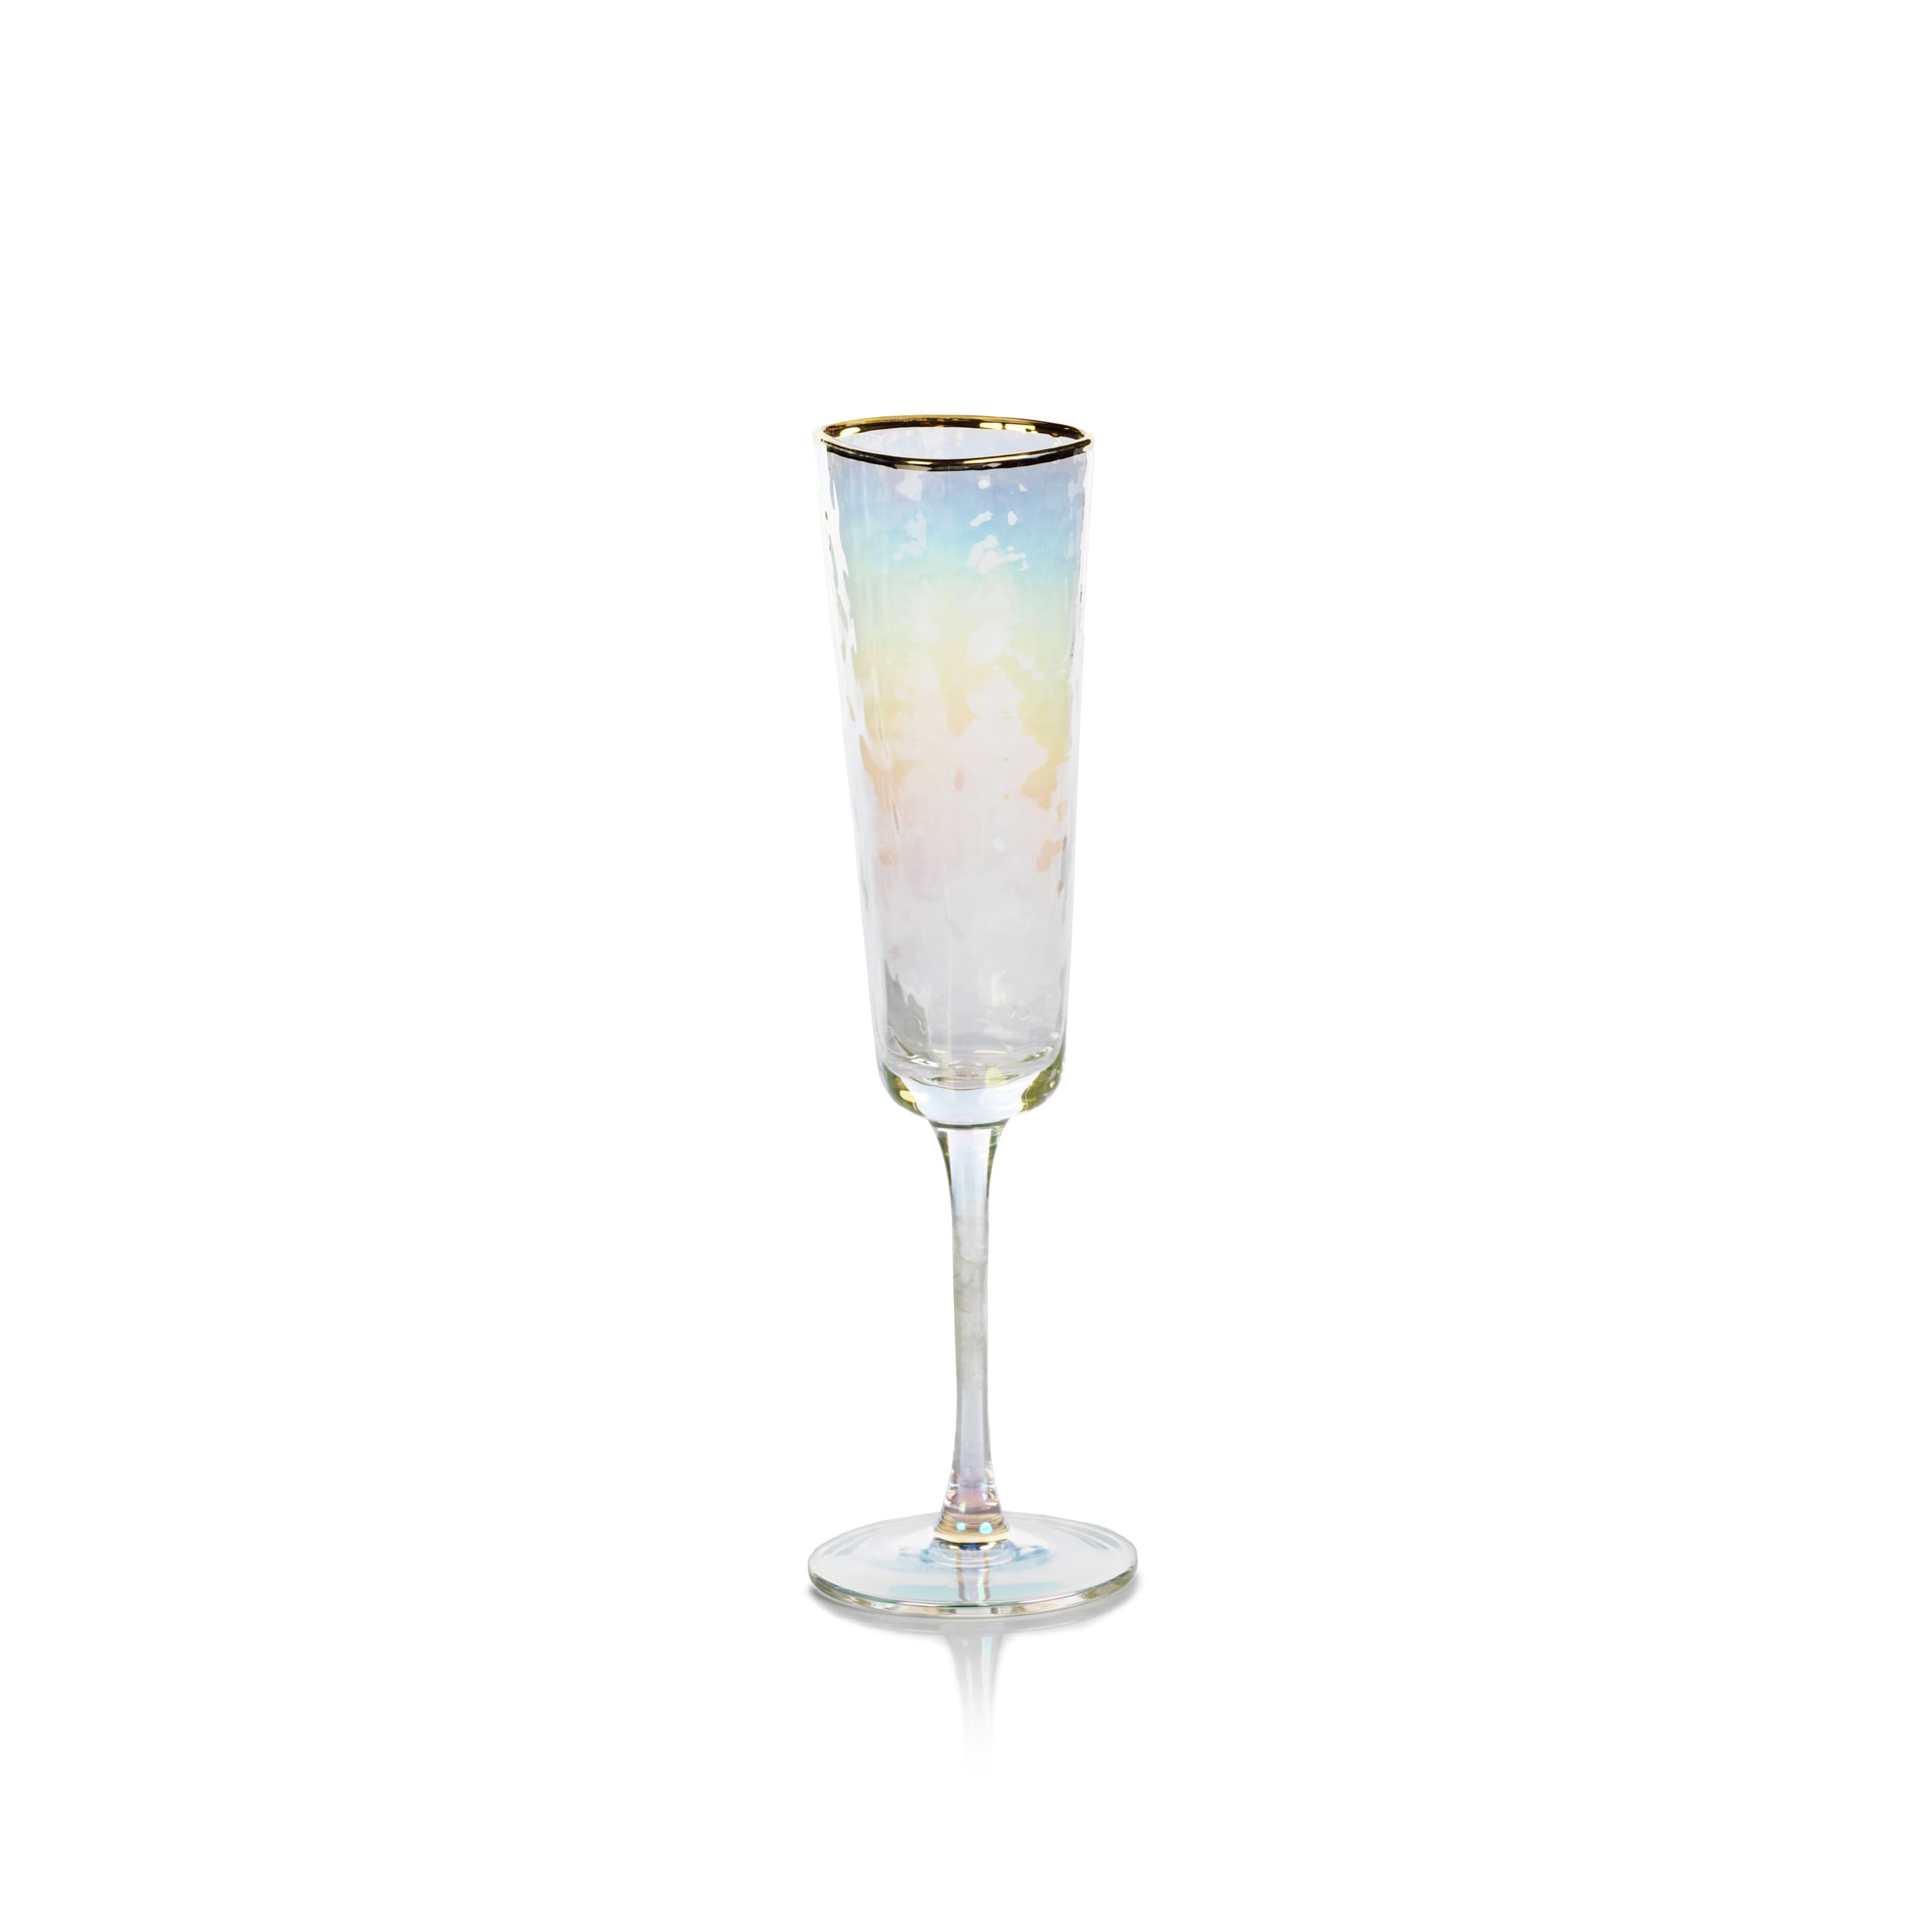 https://ak1.ostkcdn.com/images/products/is/images/direct/bf11a1a11f669aa1ddf766e6784c30570095184c/Kampari-Triangular-Champagne-Flutes-with-Gold-Rim%2C-Set-of-4.jpg